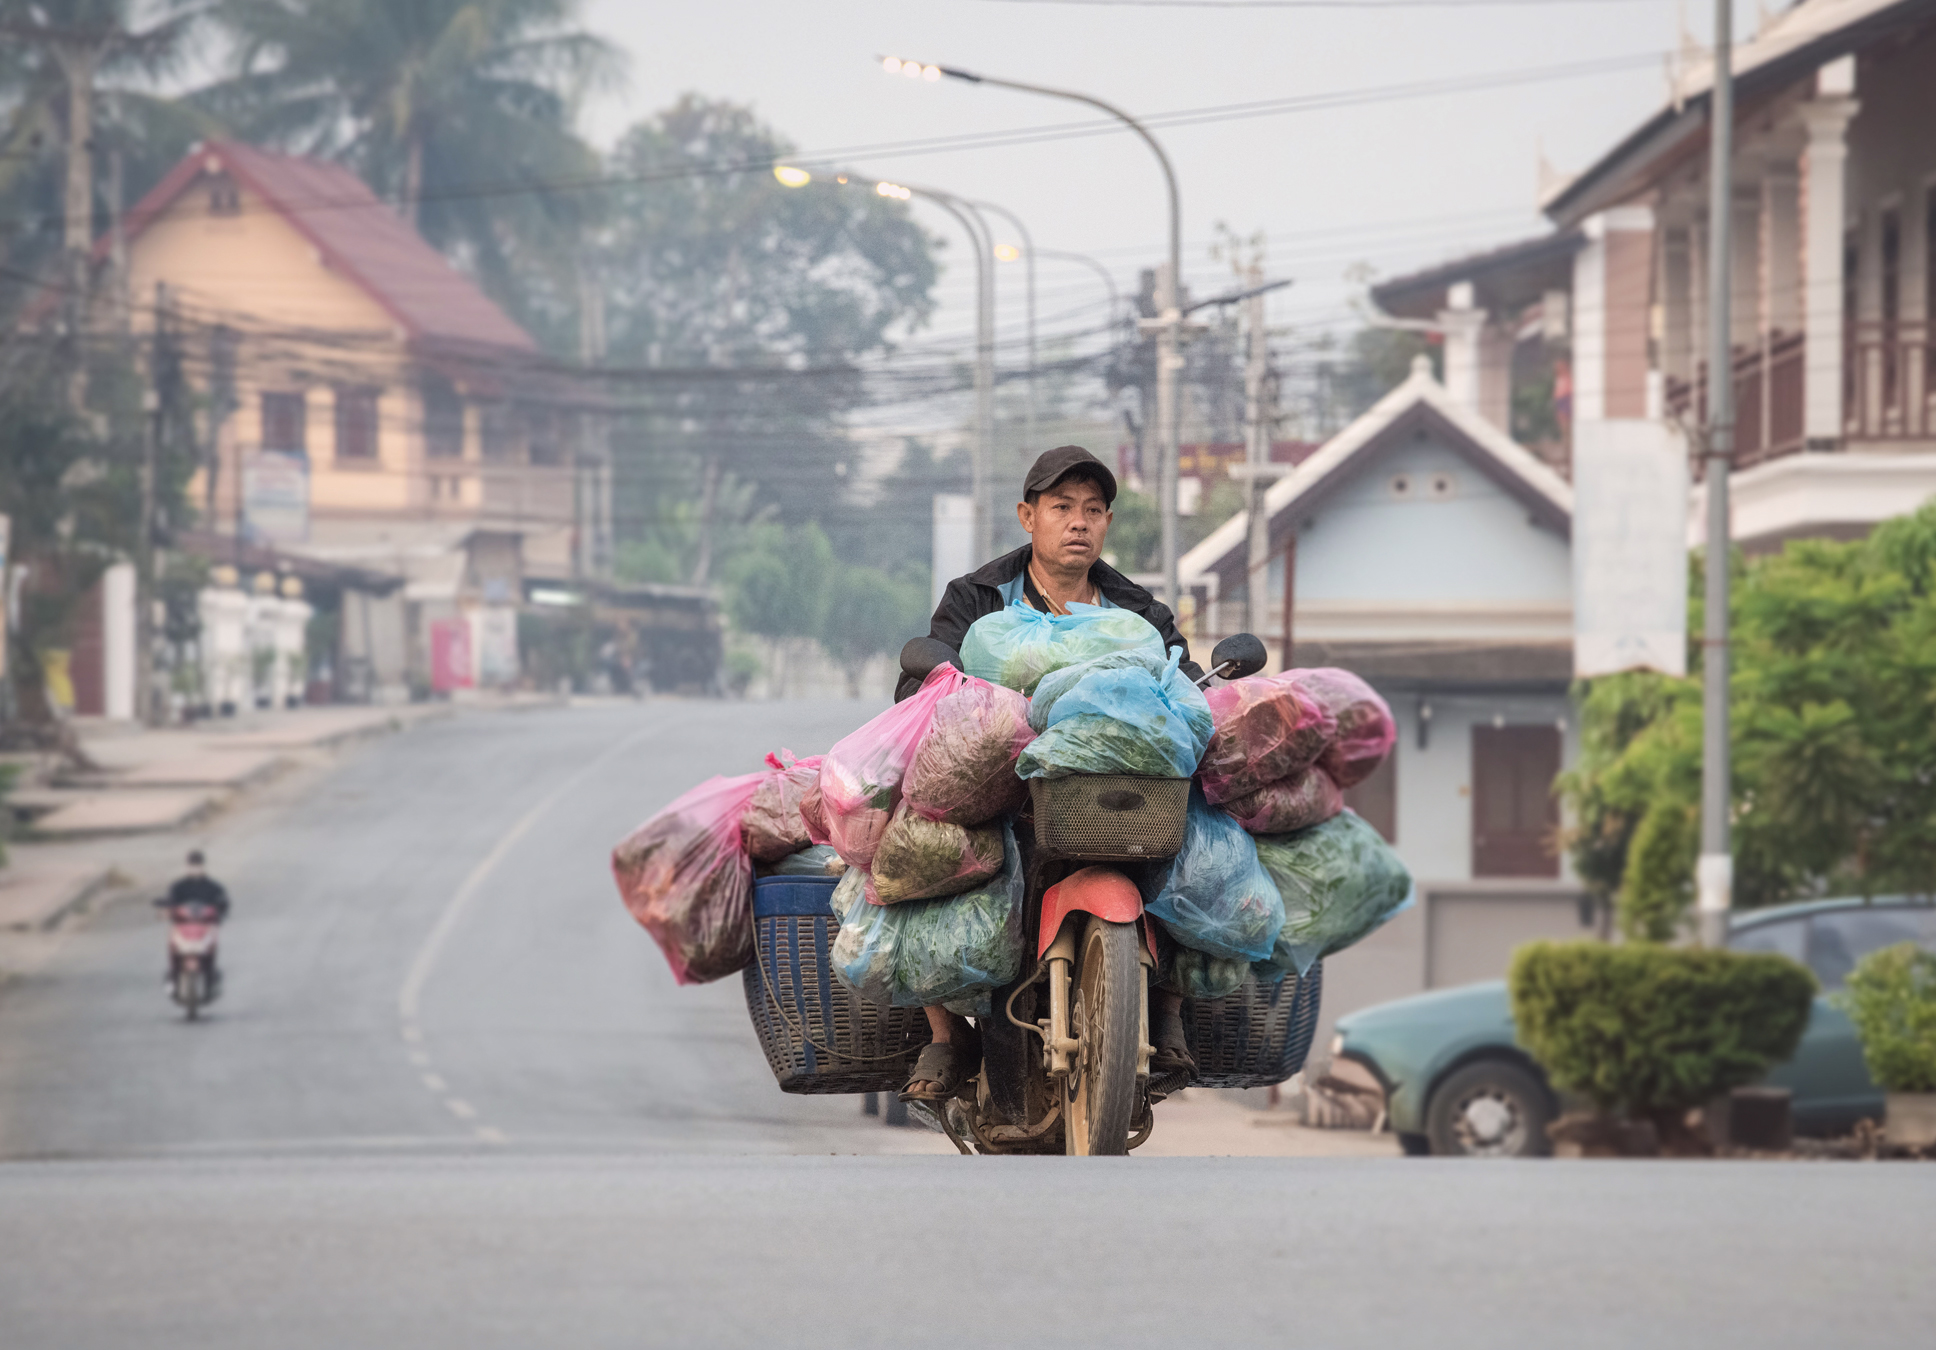 a man riding a motorcycle with many bags on it